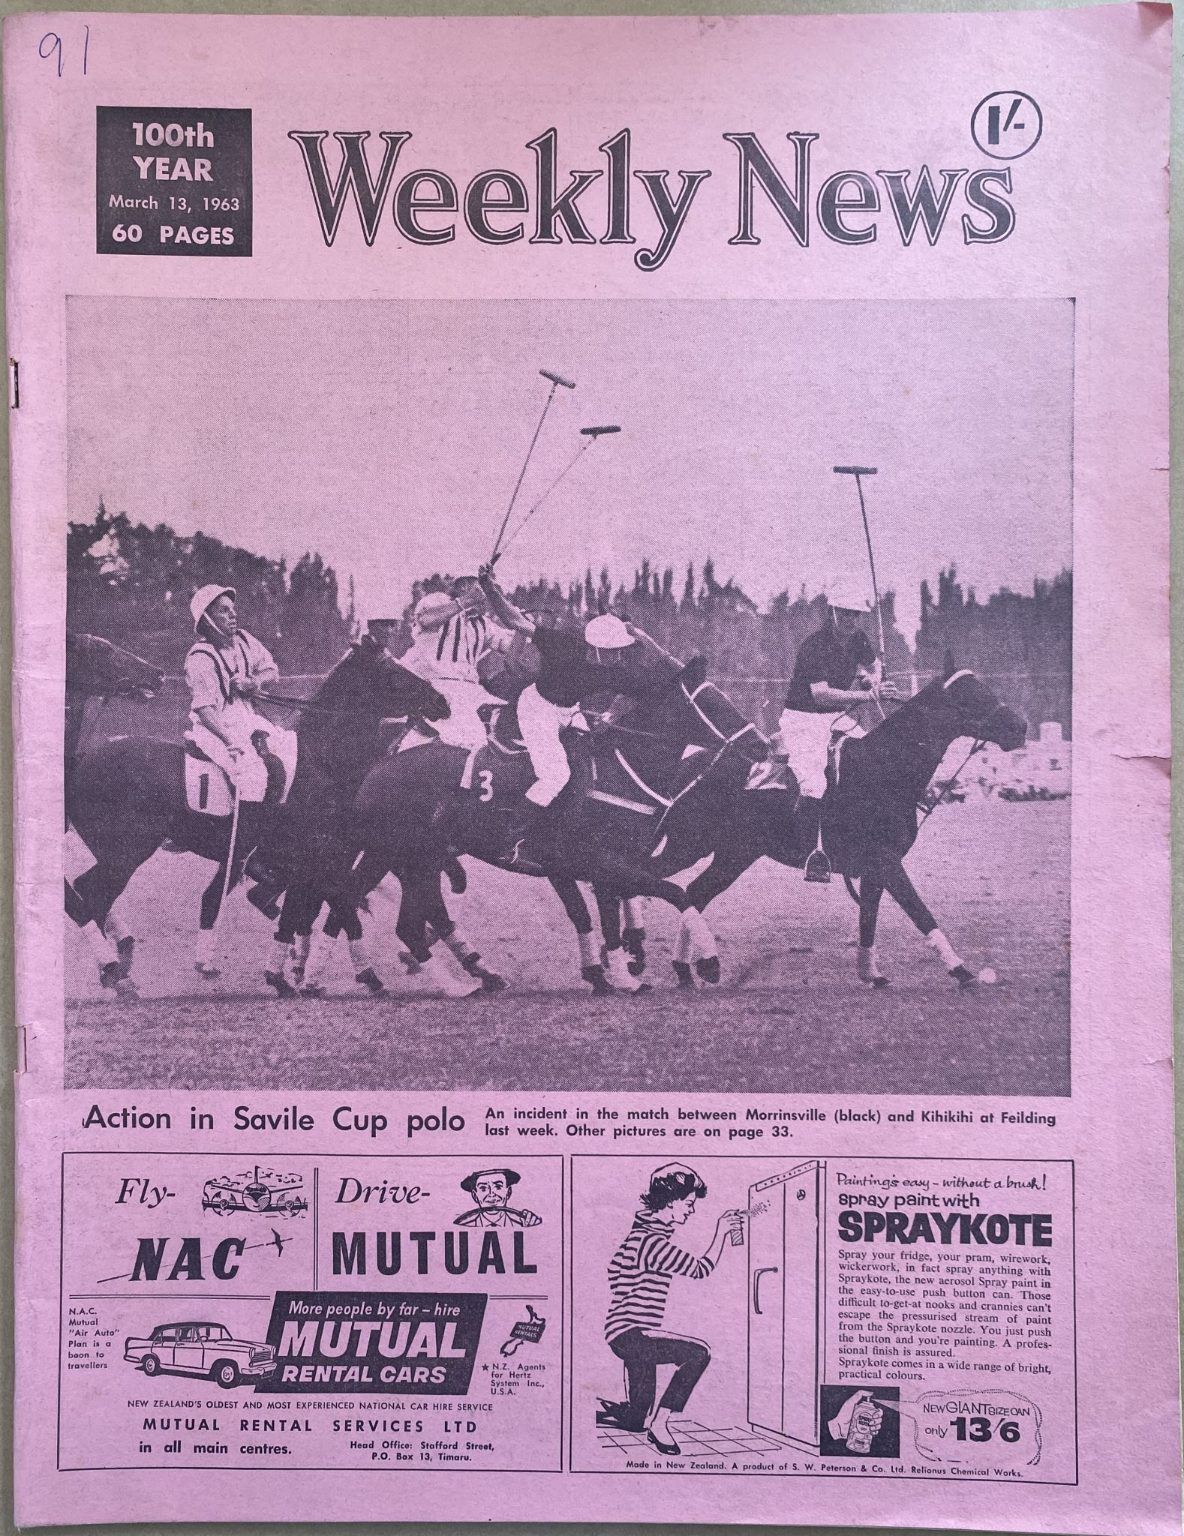 OLD NEWSPAPER: The Weekly News, No. 5181, 13 March 1963